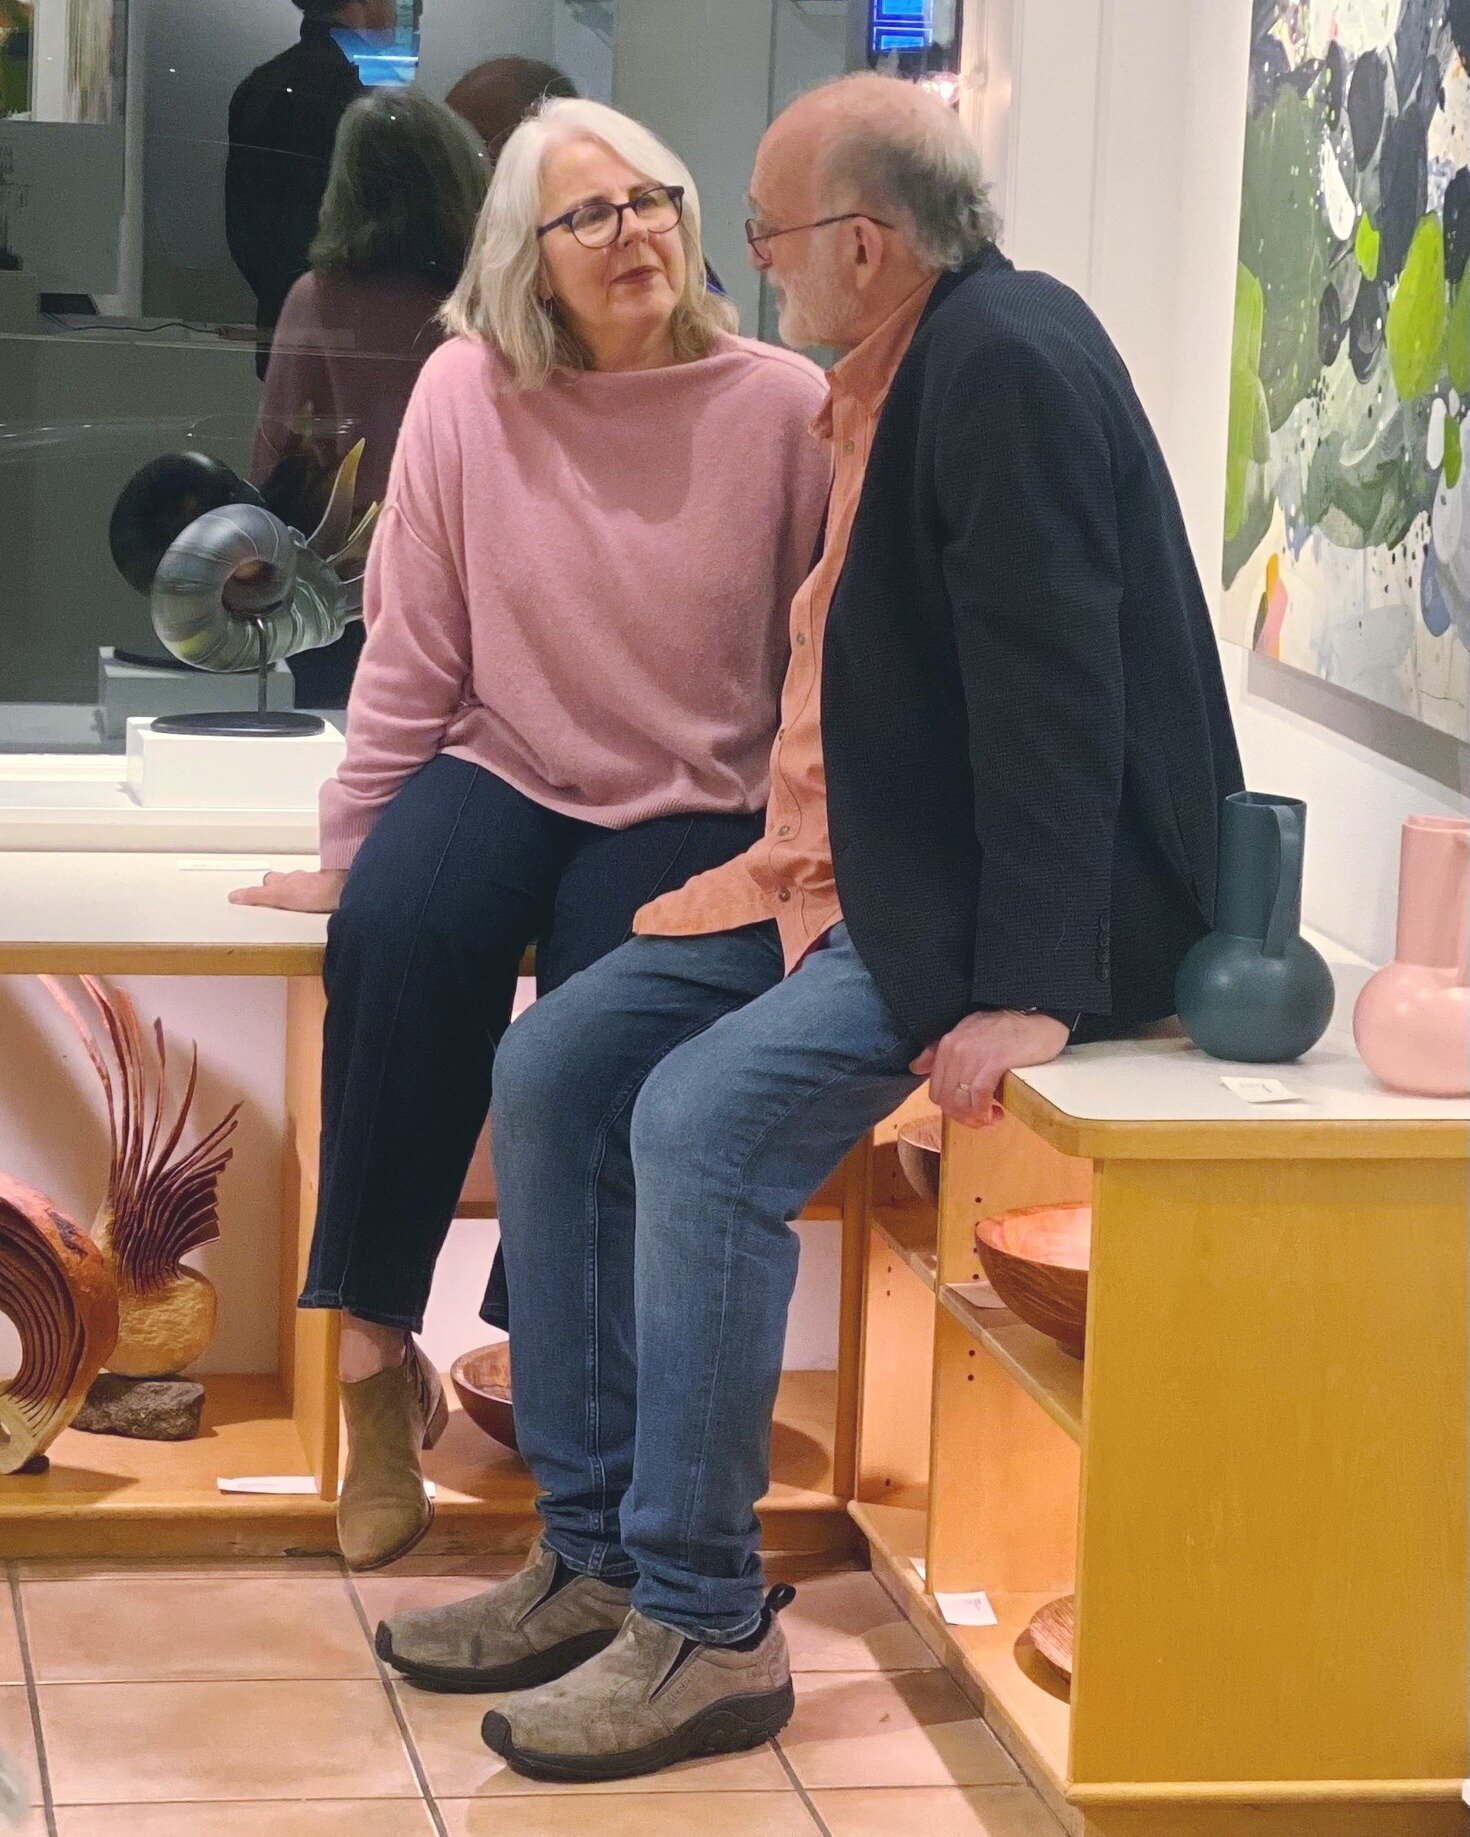 Love is in the air at Museo! 💘 Sending warm thoughts to all of our clients, artists and community members &ndash; we appreciate each and every one of you! xo, Nancy &amp; Michael

💗 P.S. The gallery will be open additional hours (11am-4pmish - call